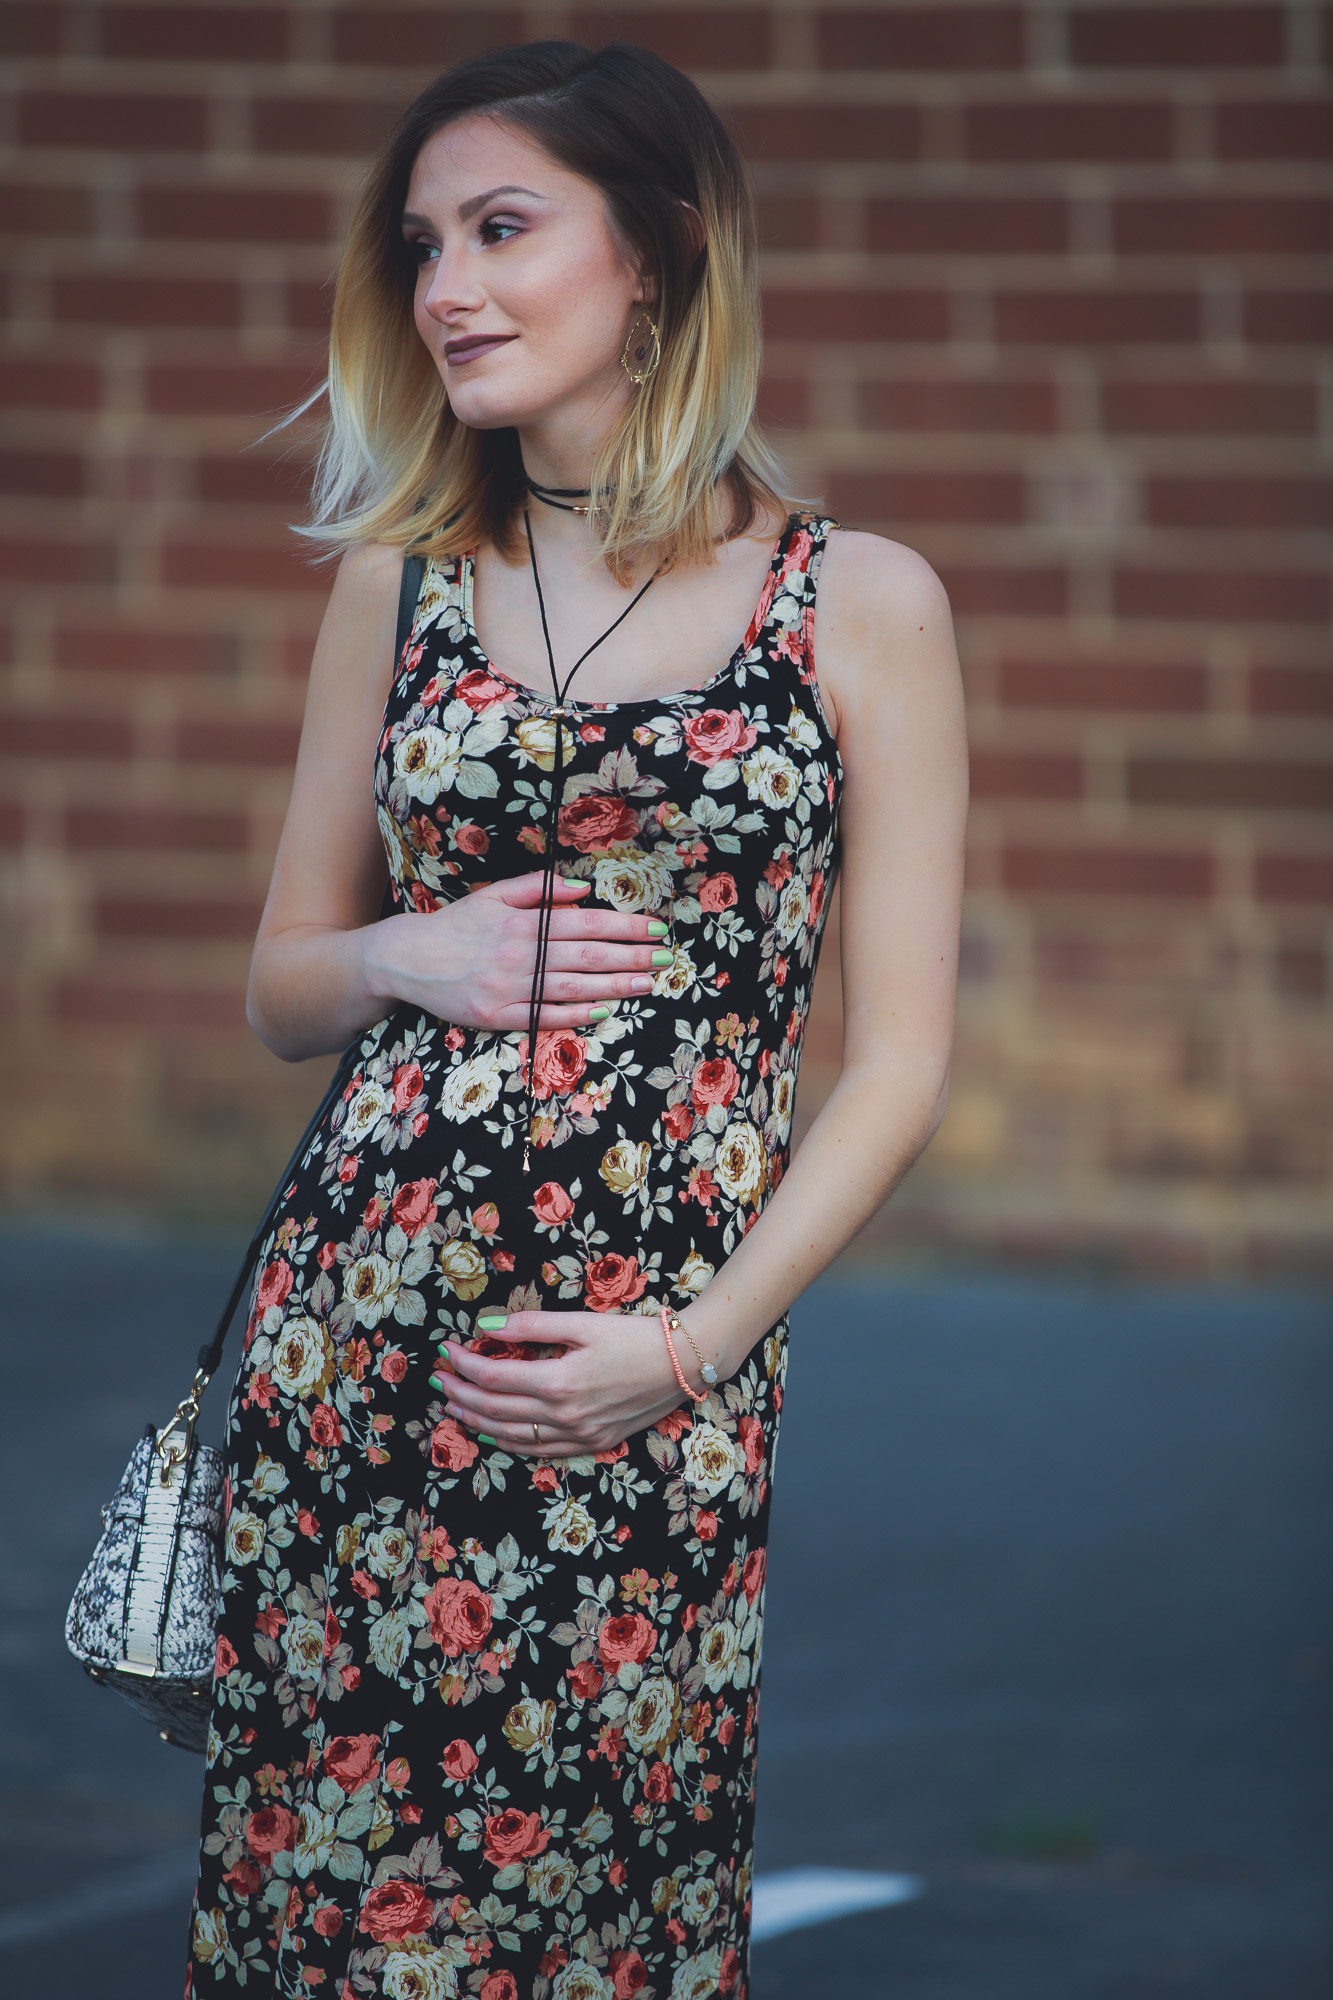 Lifestyle, fashion, and beauty blogger / vlogger Jessica Linn wearing a floral black maxi dress, Tory Burch sandals, a Coach purse, and earrings from CY Design Studio in Cary North Carolina on Linn Style